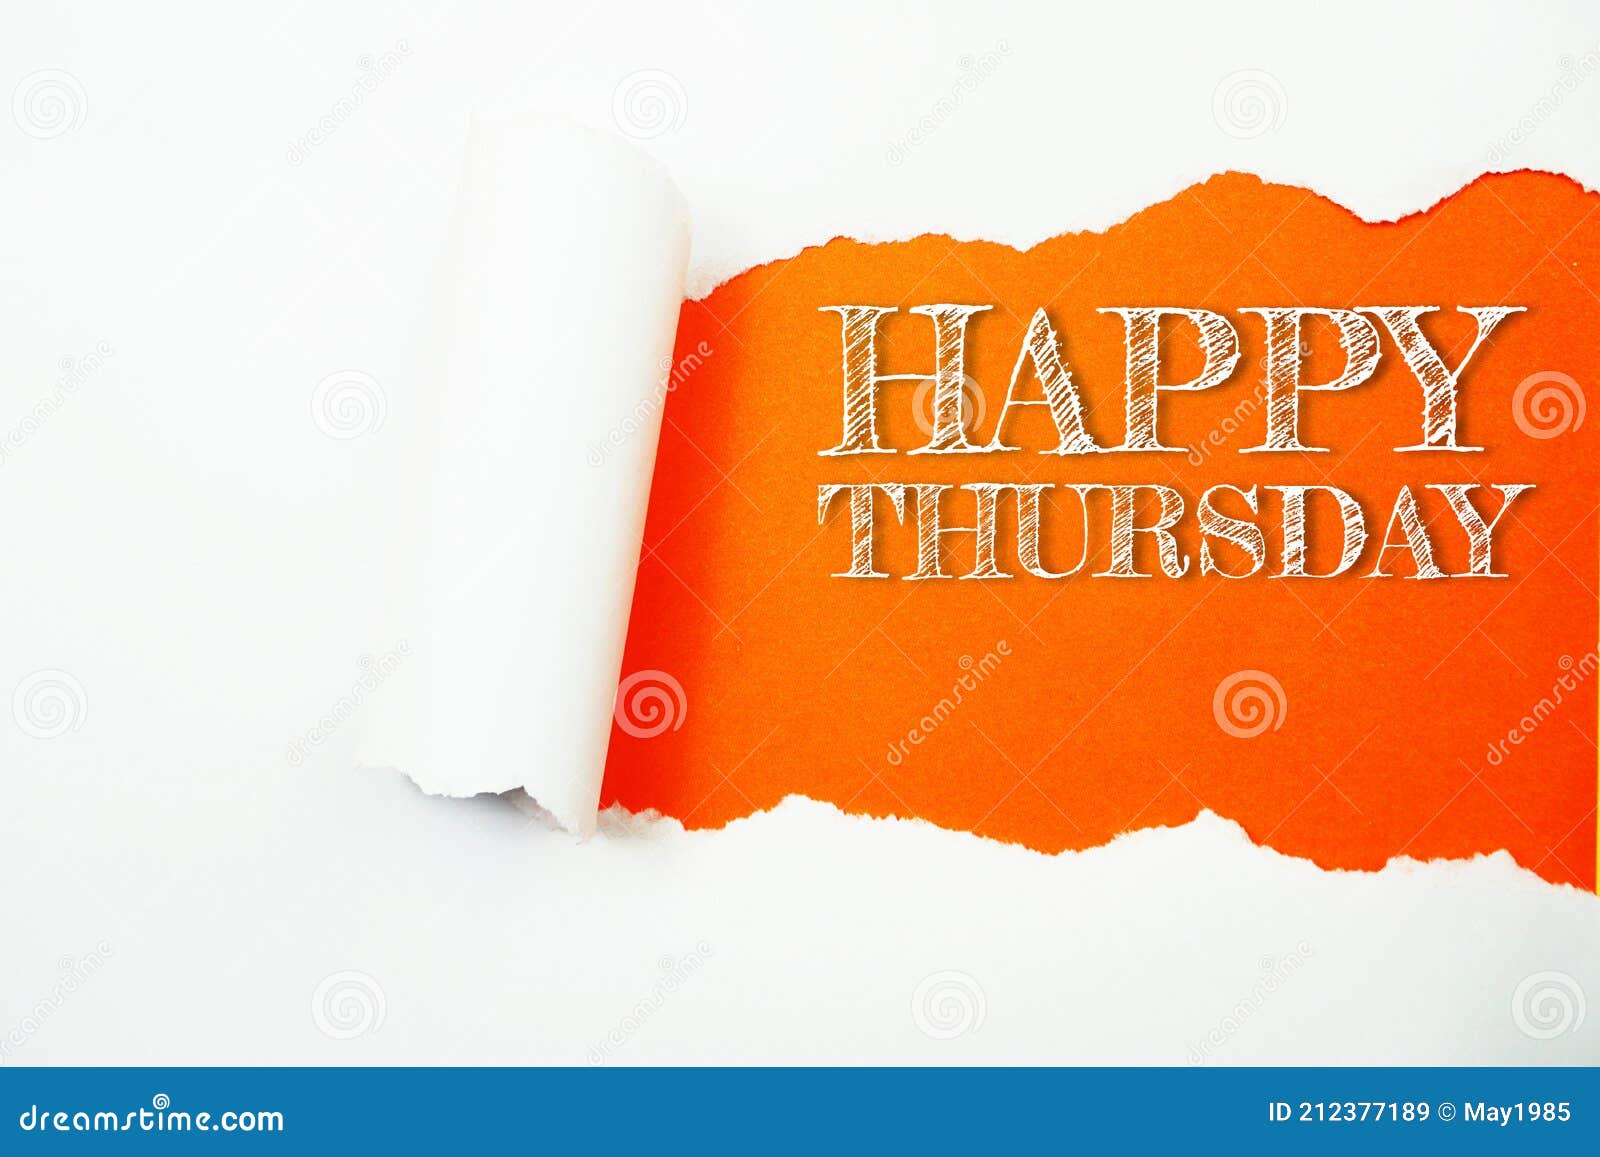 Happy Thursday Word on Orange Background with Paper Torn Stock ...